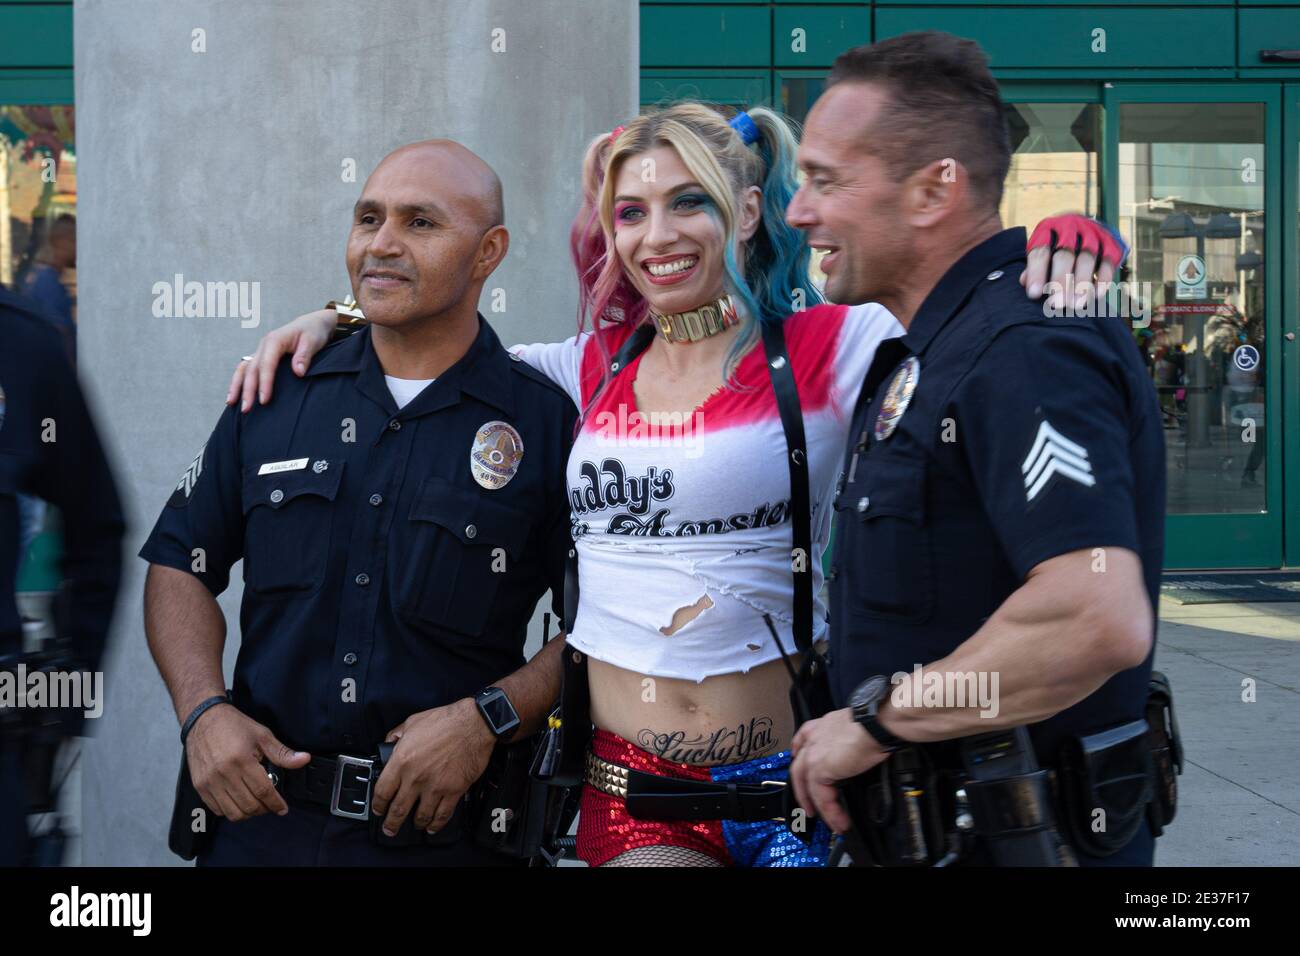 A cosplayer dressed as Harley Quinn with her hands on the shoulders of two smiling uniformed policemen, Comicon LA, California 2019 Stock Photo